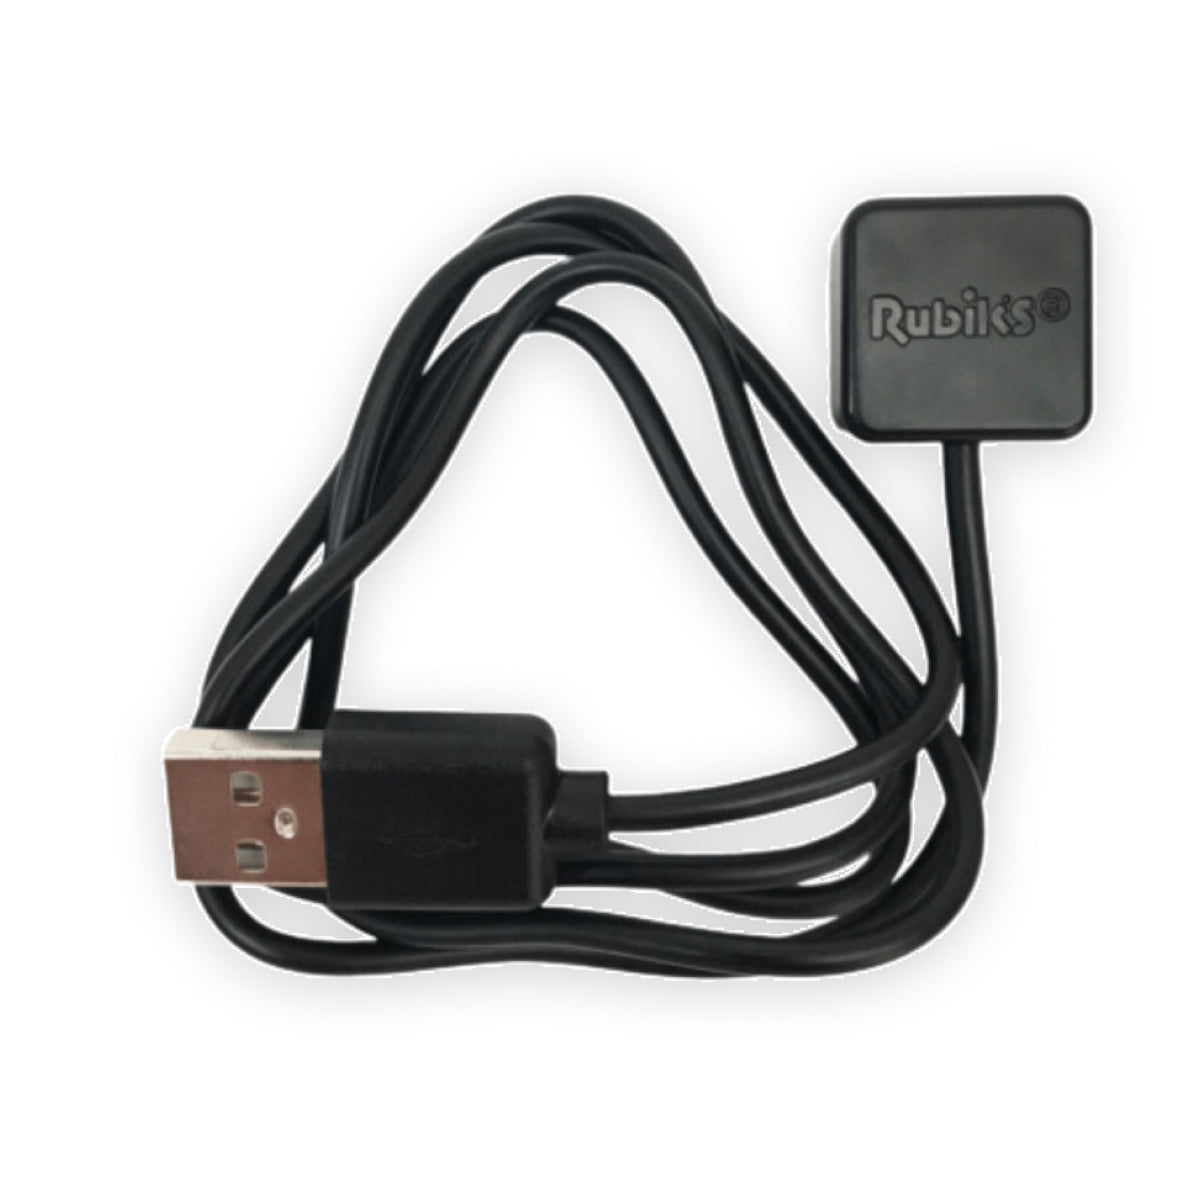 Rubik’s Connected charging cable